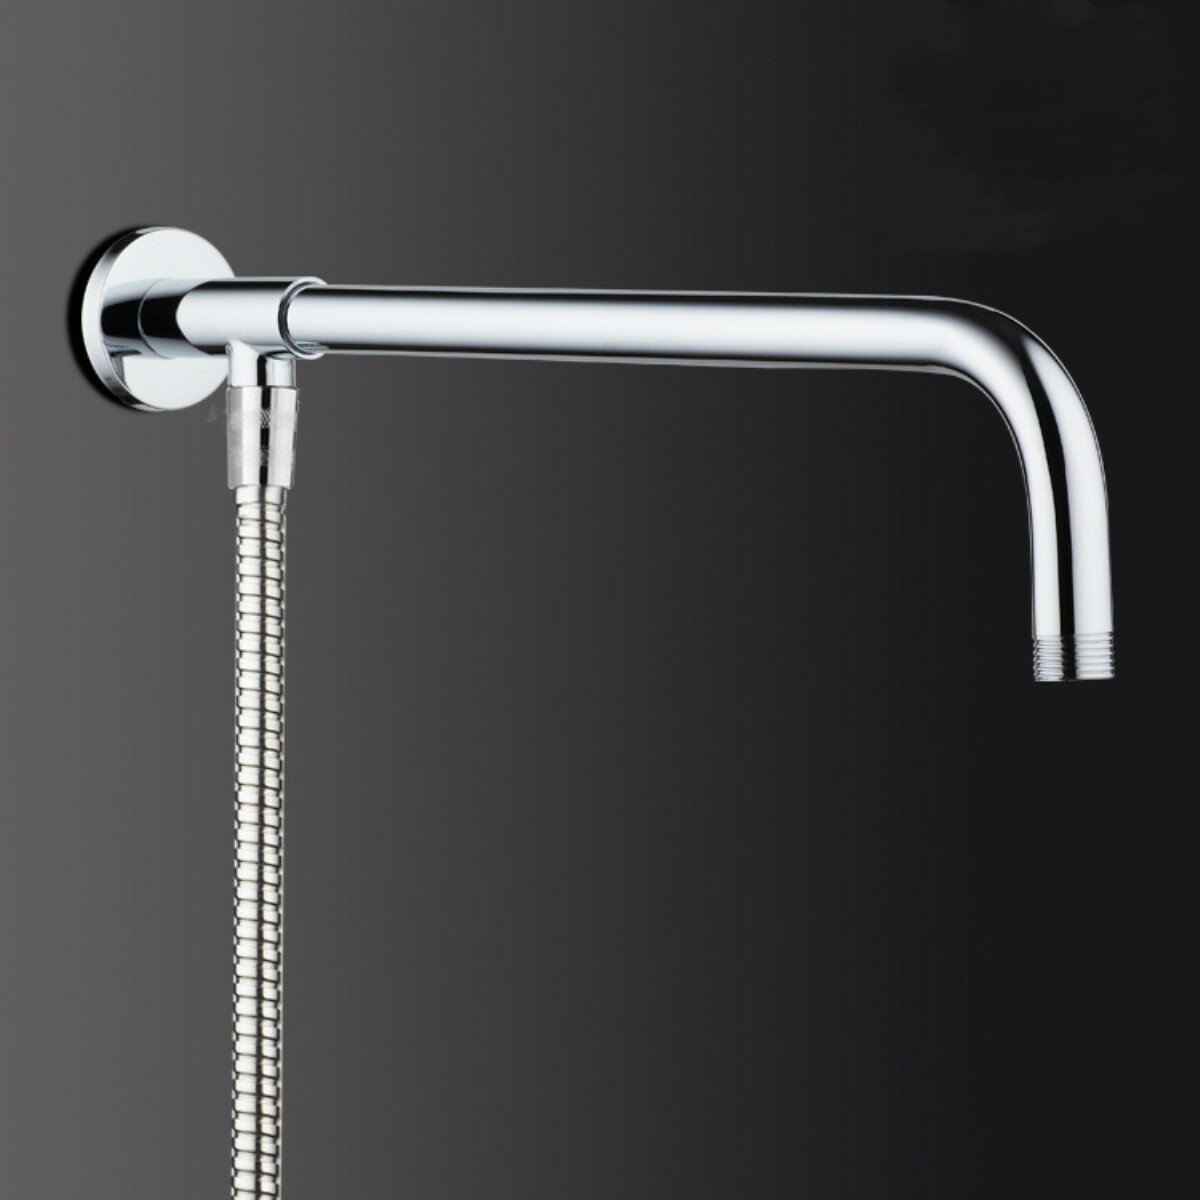 37cm/48cm Rain Shower Head Wall Arm Stainless Steel Extension Water Pipe with Base Mount